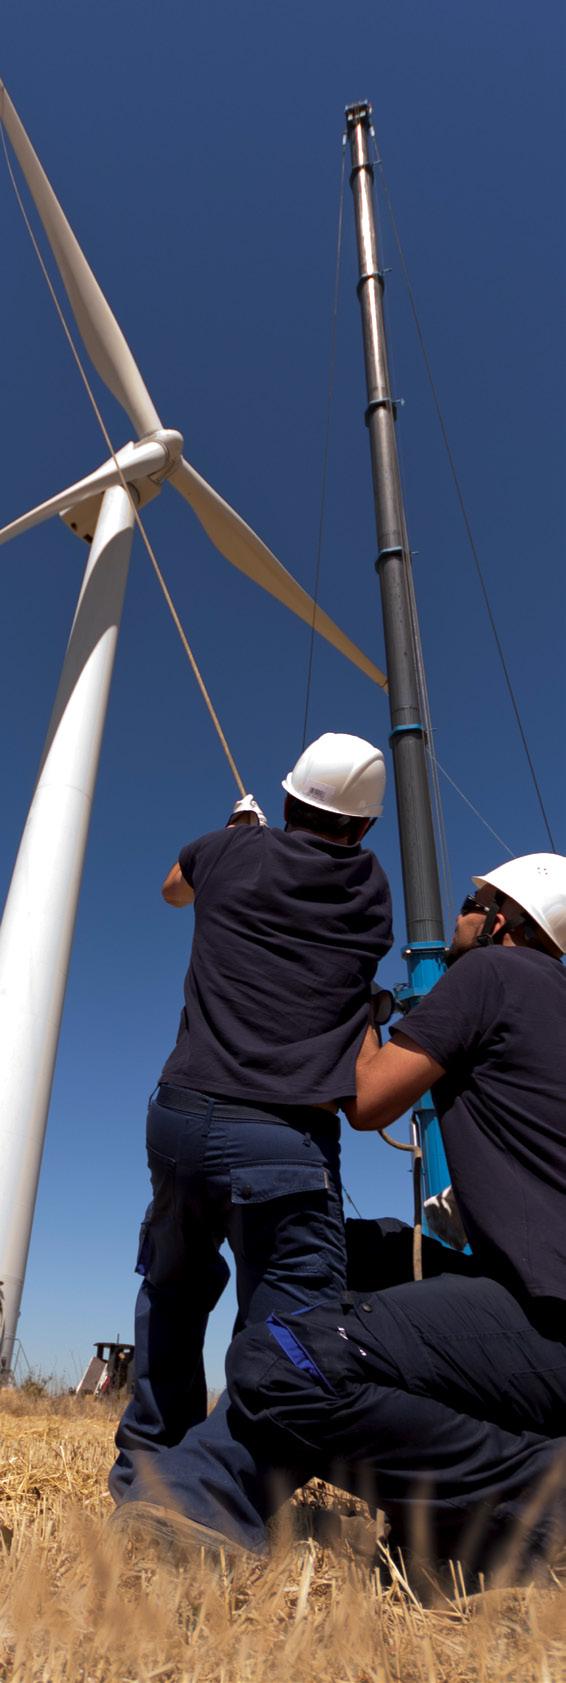 Since 1999, Ingeteam Service has been dedicated to the provision of all-inclusive Operation and Maintenance Services for wind farms.